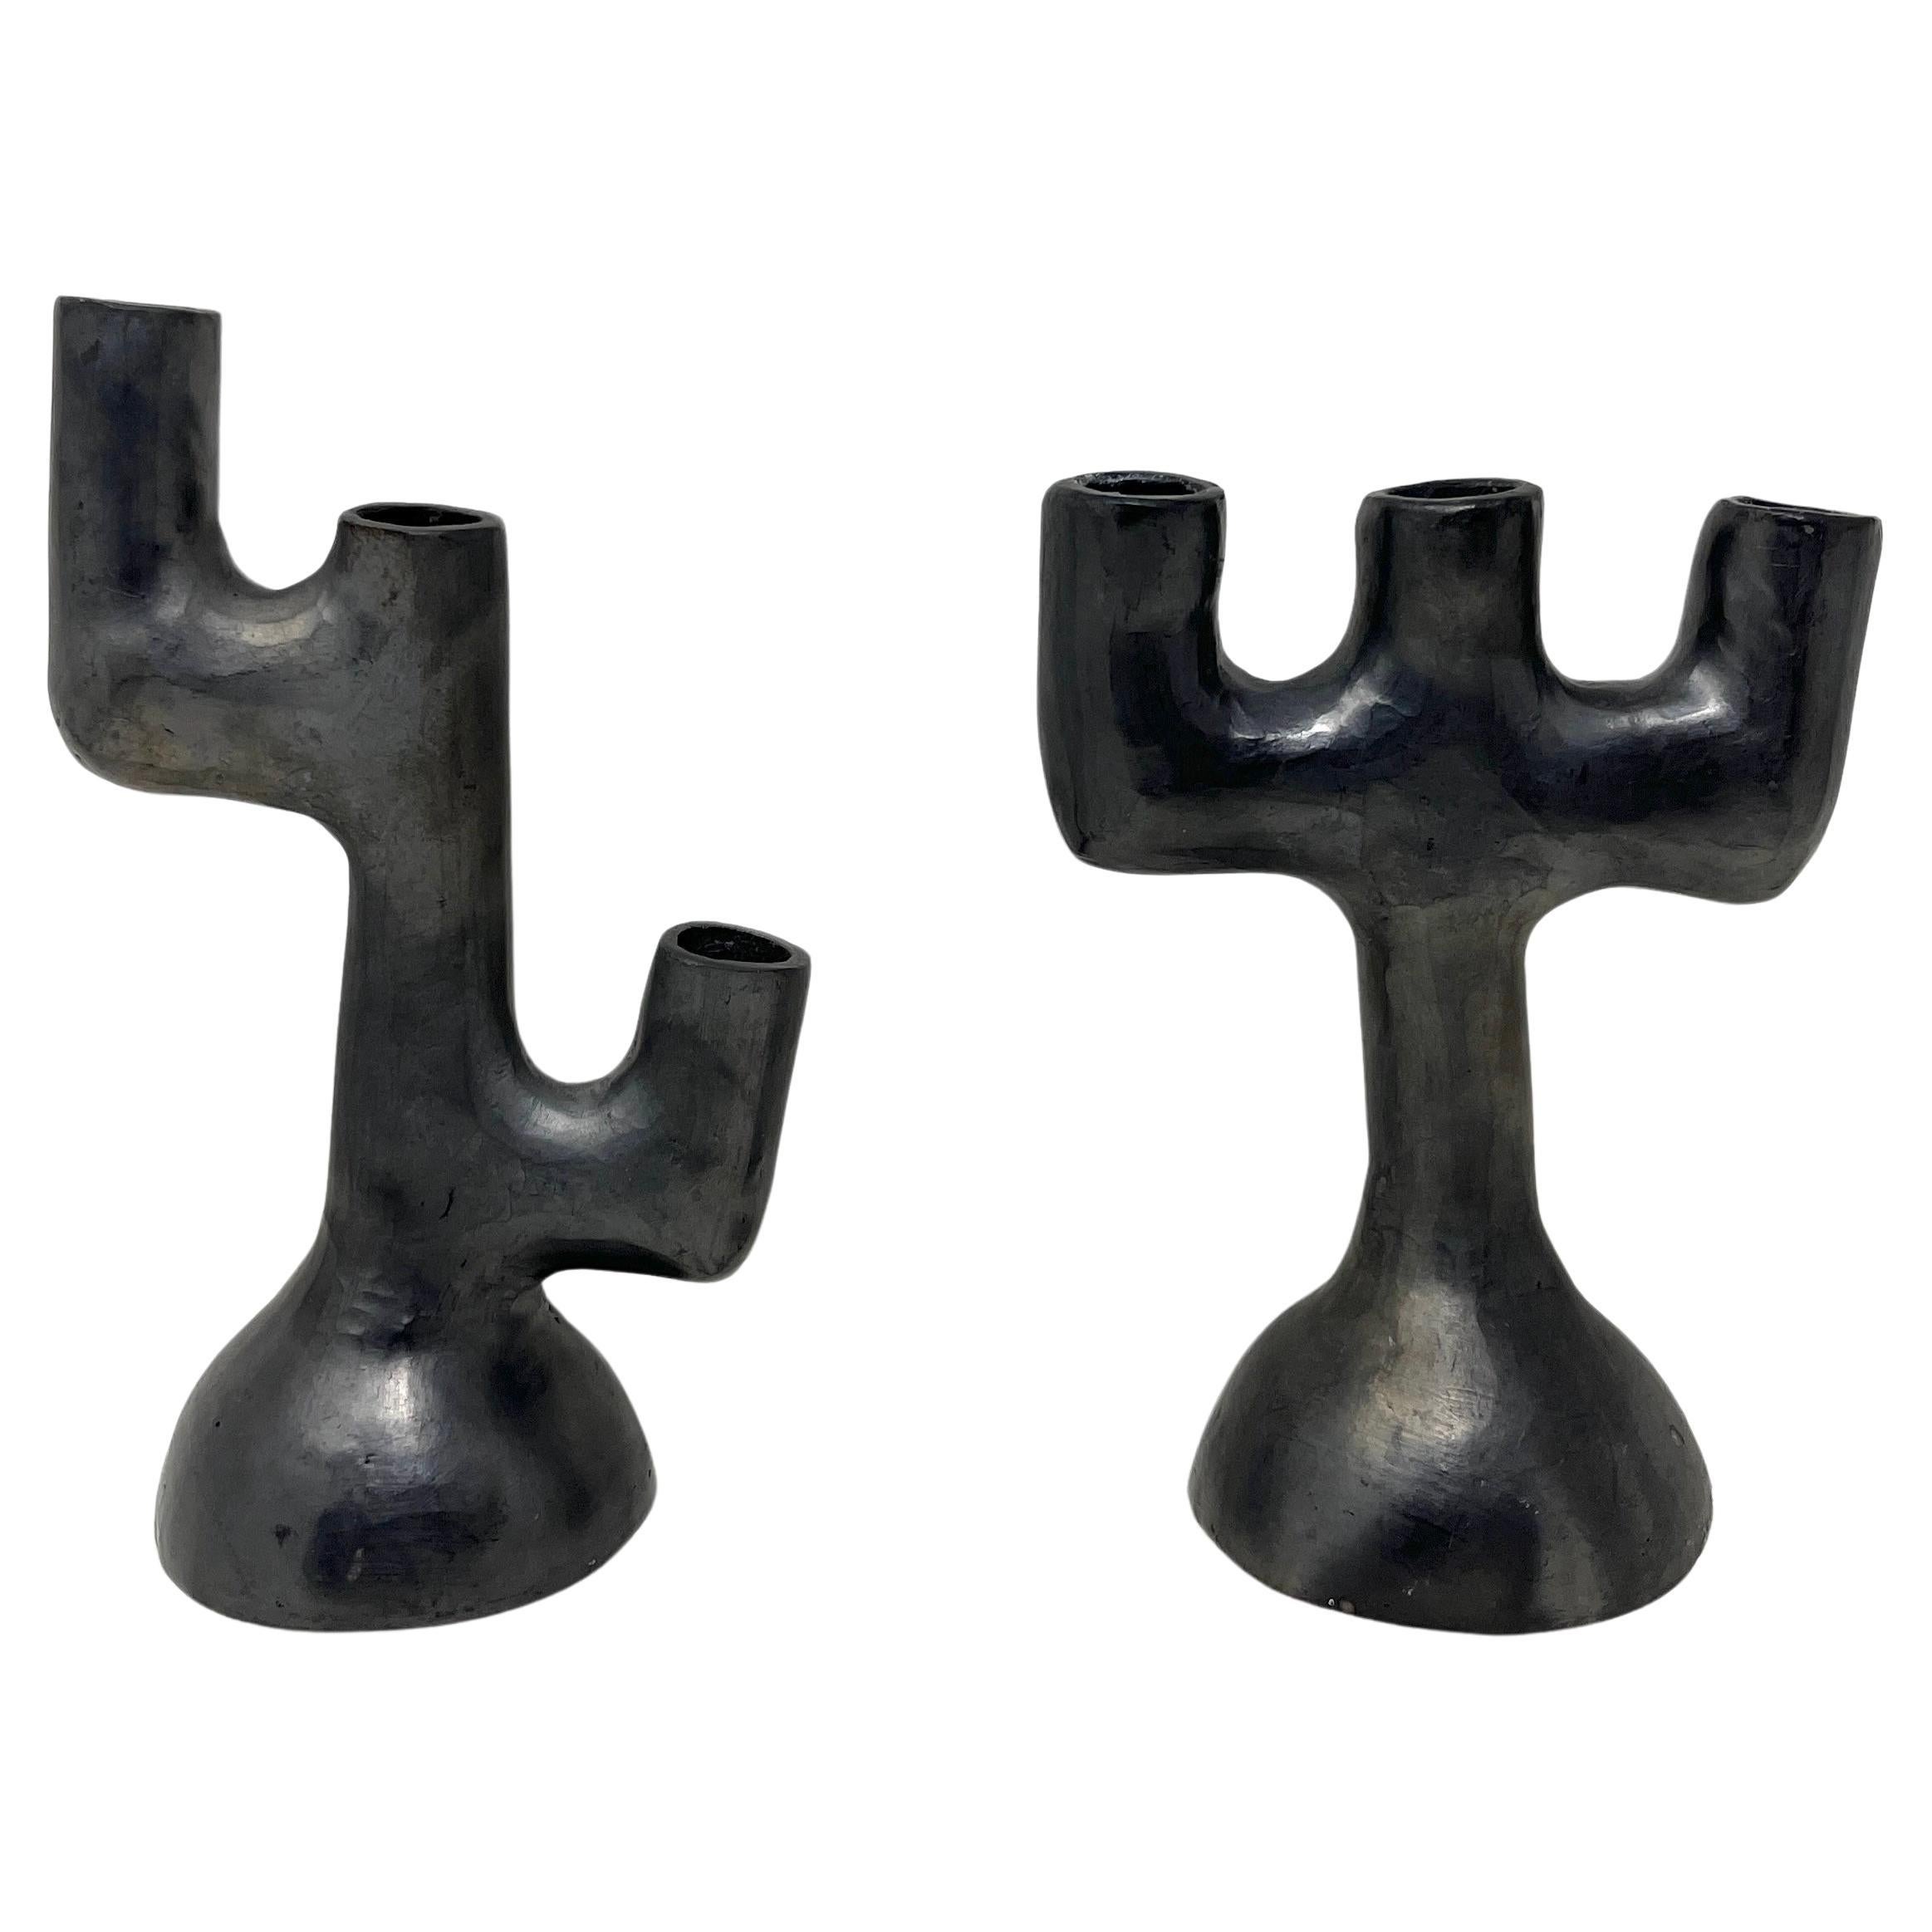 Vintage Mexican Folk Art Burnished Barro Negro Candle Holders from Oaxaca